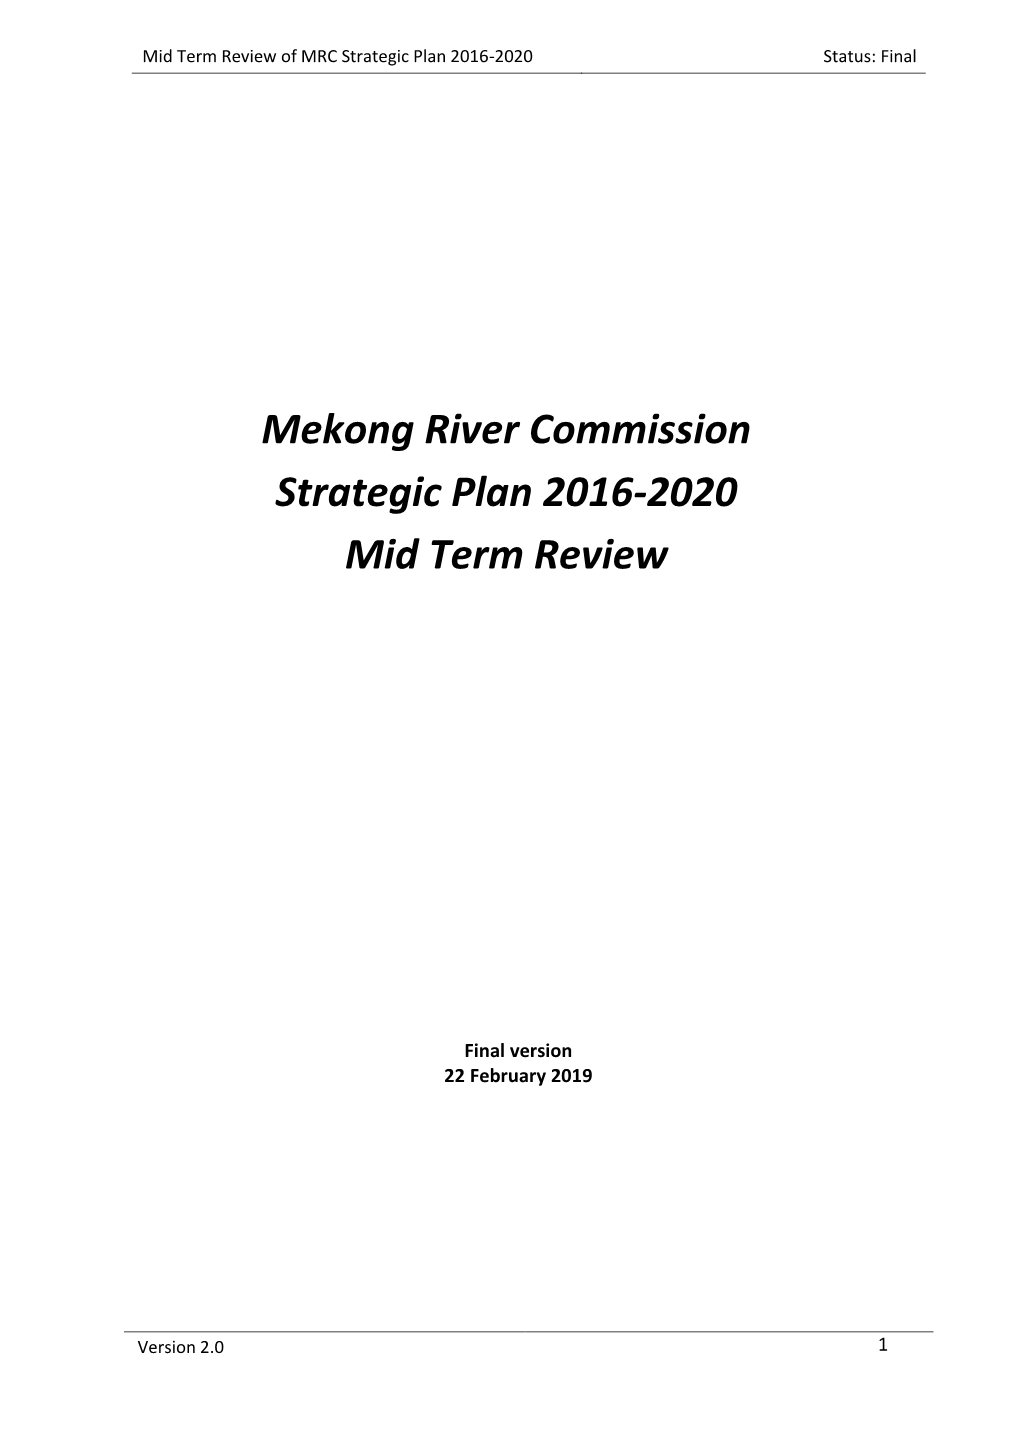 Mekong River Commission Strategic Plan 2016-2020 Mid Term Review